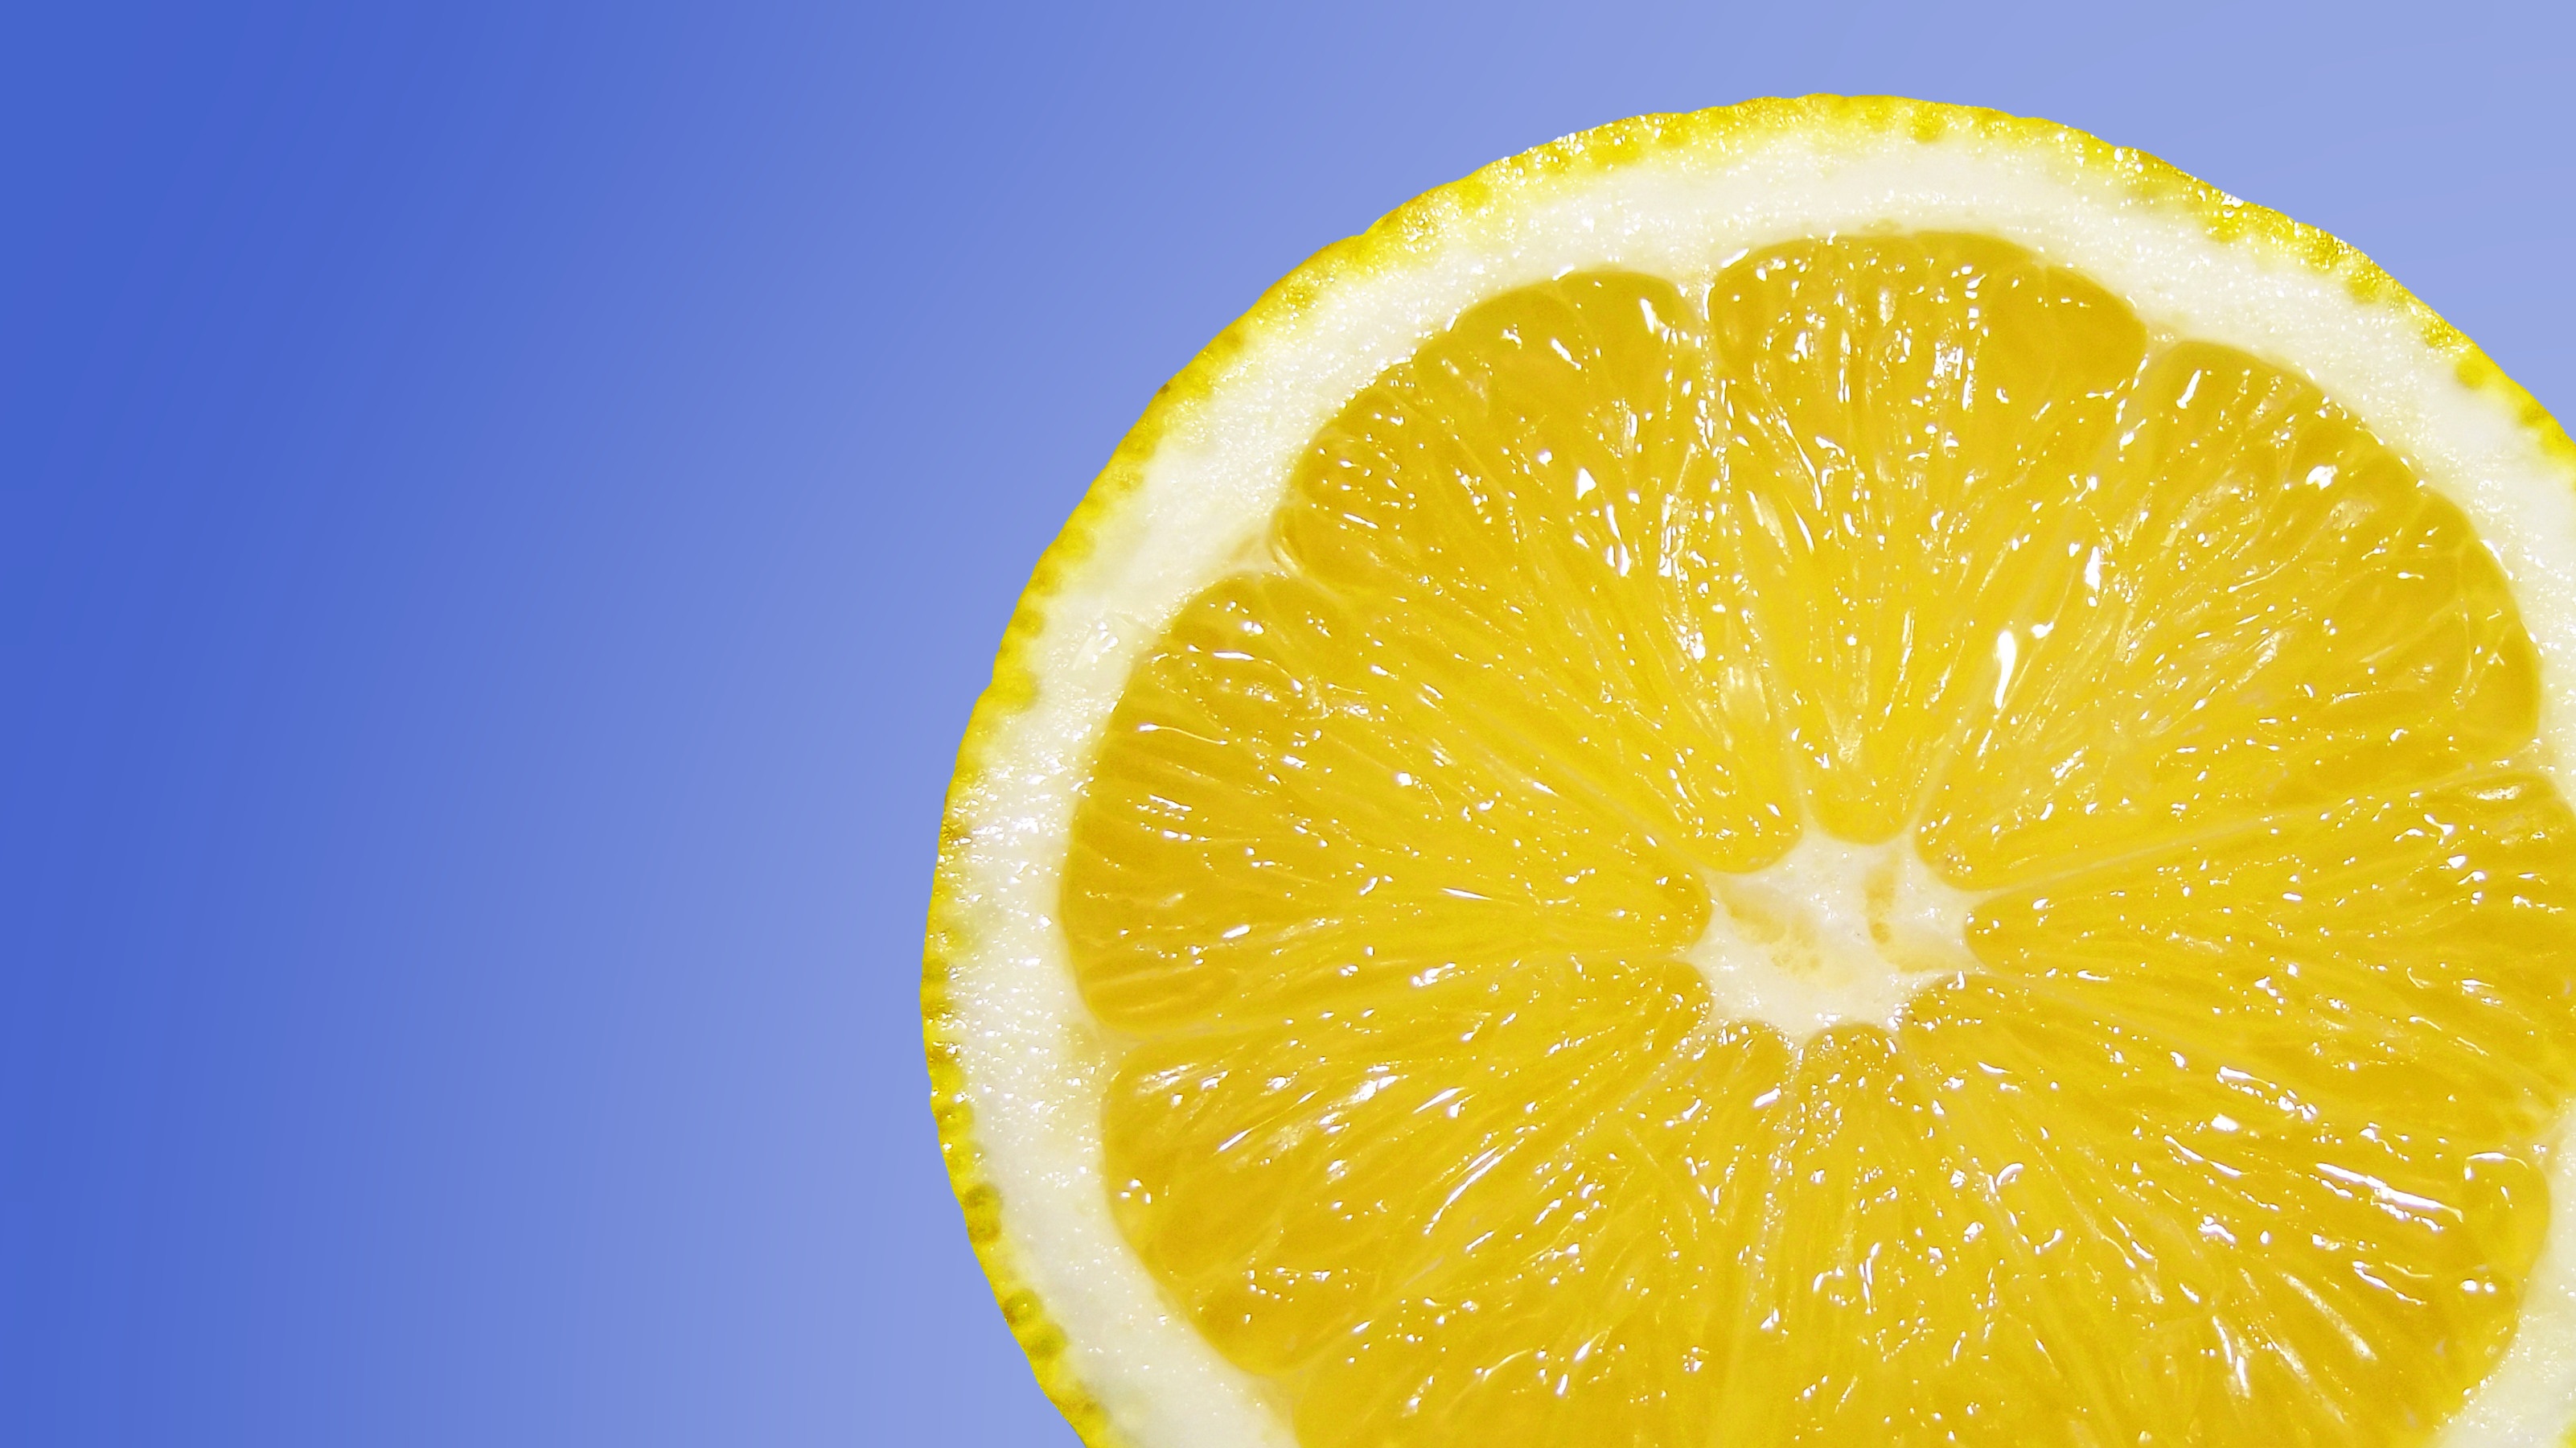 132640 Screensavers and Wallpapers Lemon for phone. Download minimalism, lemon, citrus, ripe, slice, section pictures for free